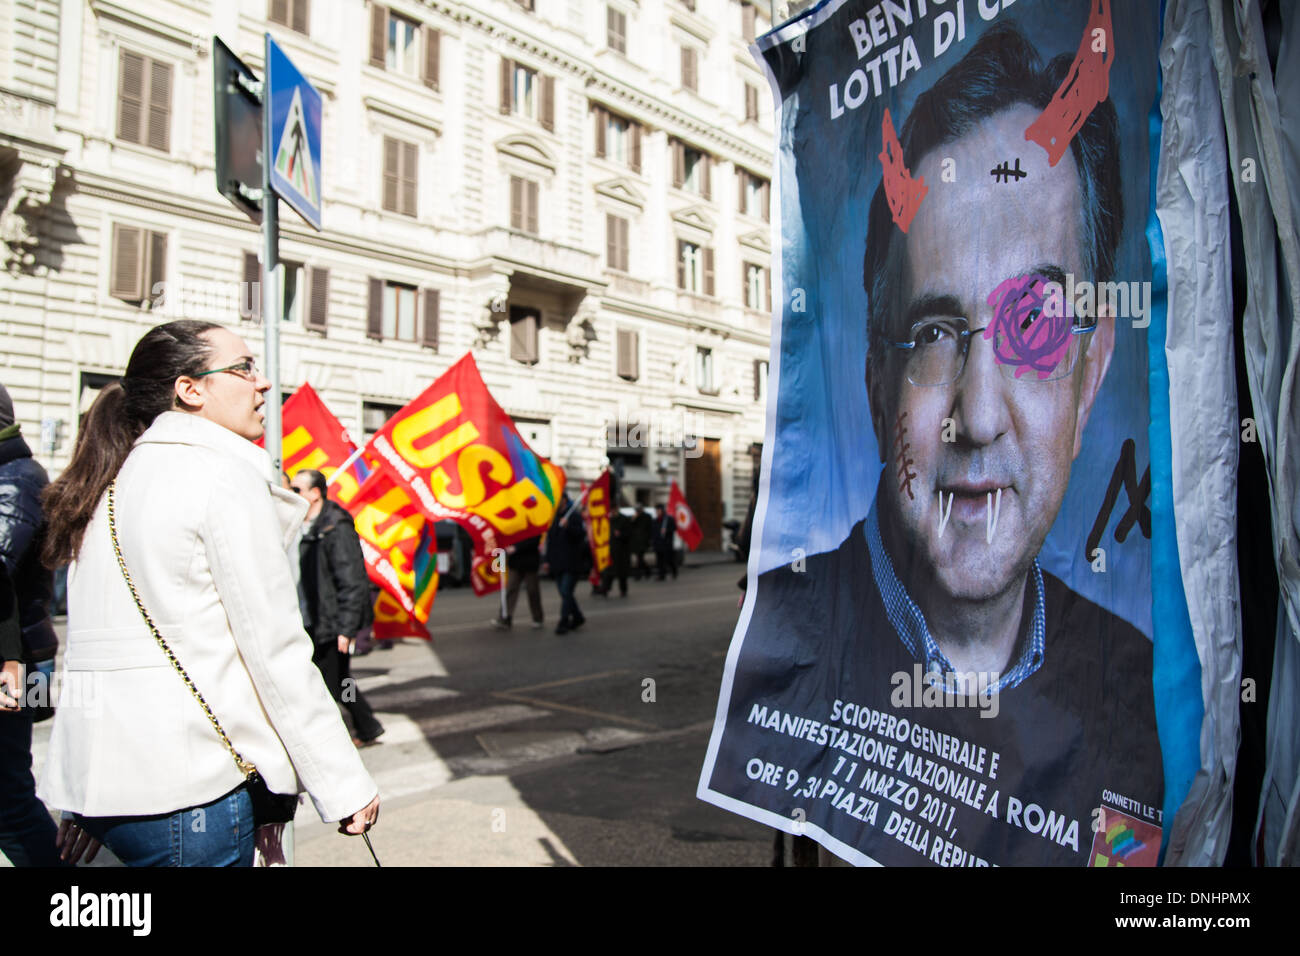 Rome, Italy. Sergio Marchionne printed on a poster protest during a demonstration in Rome. Stock Photo